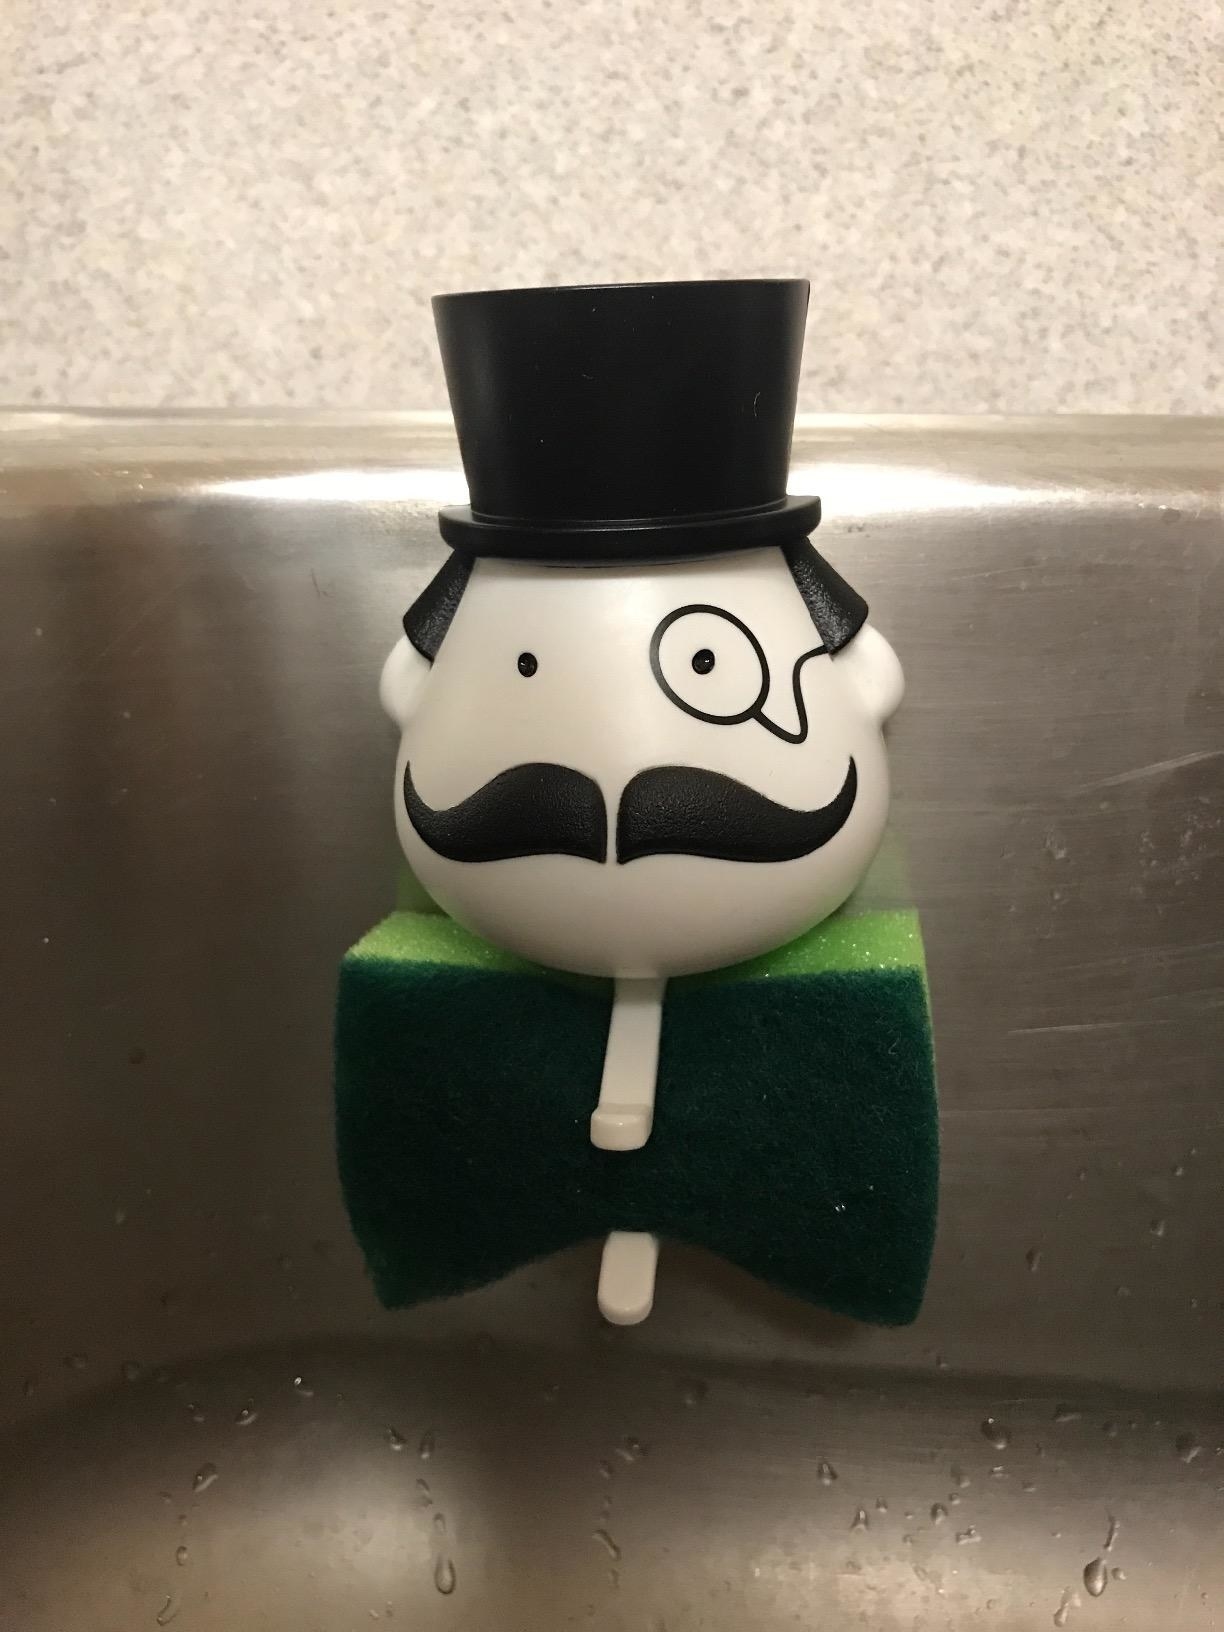 A reviewer photo of the sponge holder, which has a small &quot;head&quot; with a top hat, monocle, and mustache, and which holds the sponge below the head as if it were a bow tie